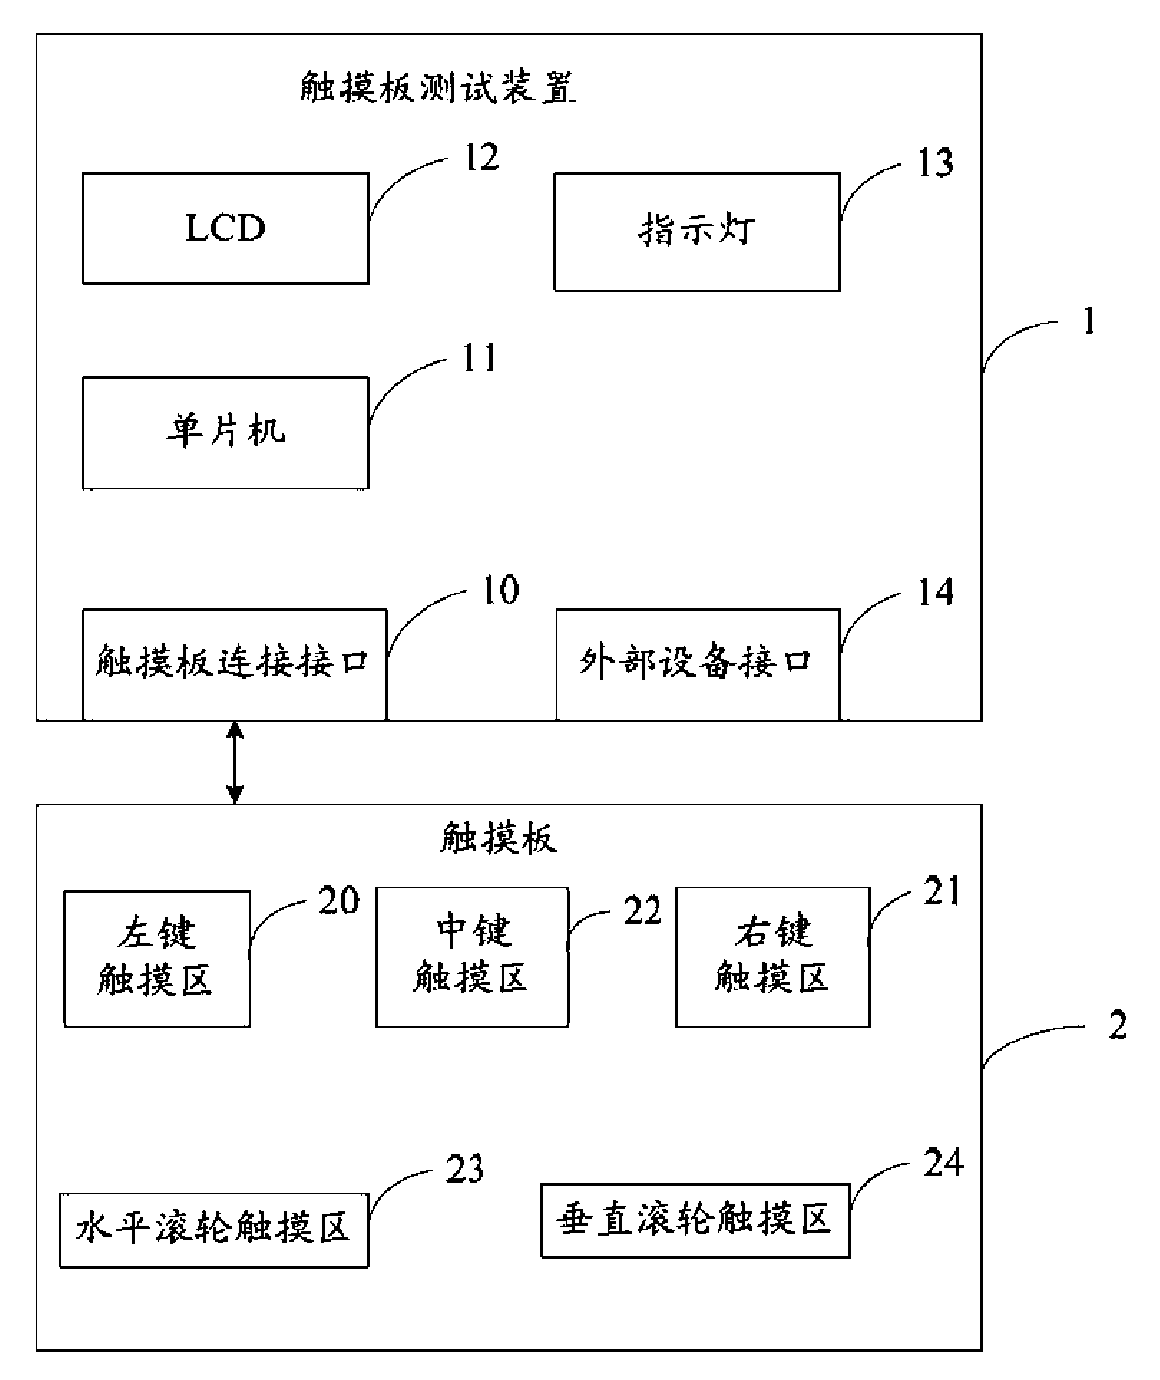 Touch pad testing device and method utilizing the device to test touch pad